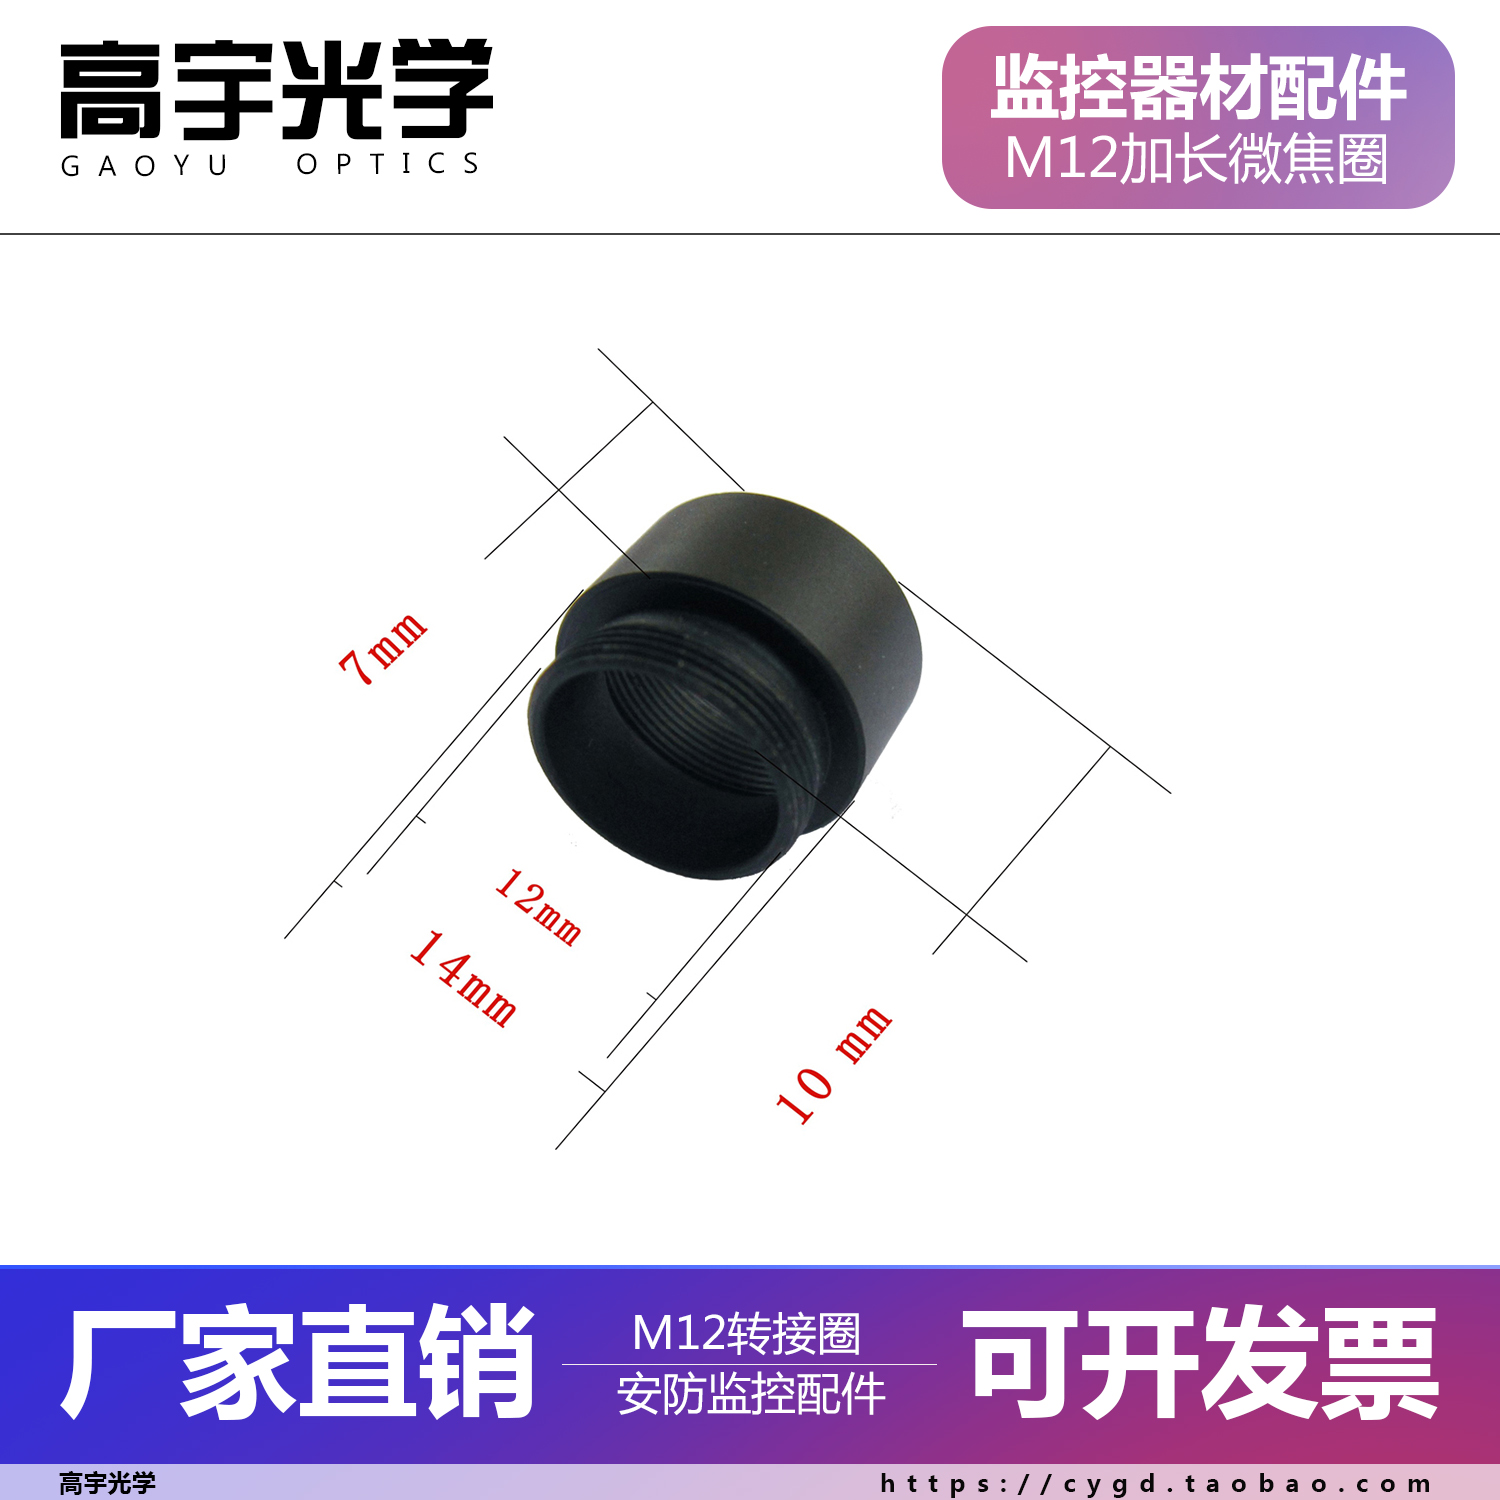 M12 connector lens metal lengthening ring lengthening ring lengthened ring heightening ring length focal lens micro-focal coil accessory